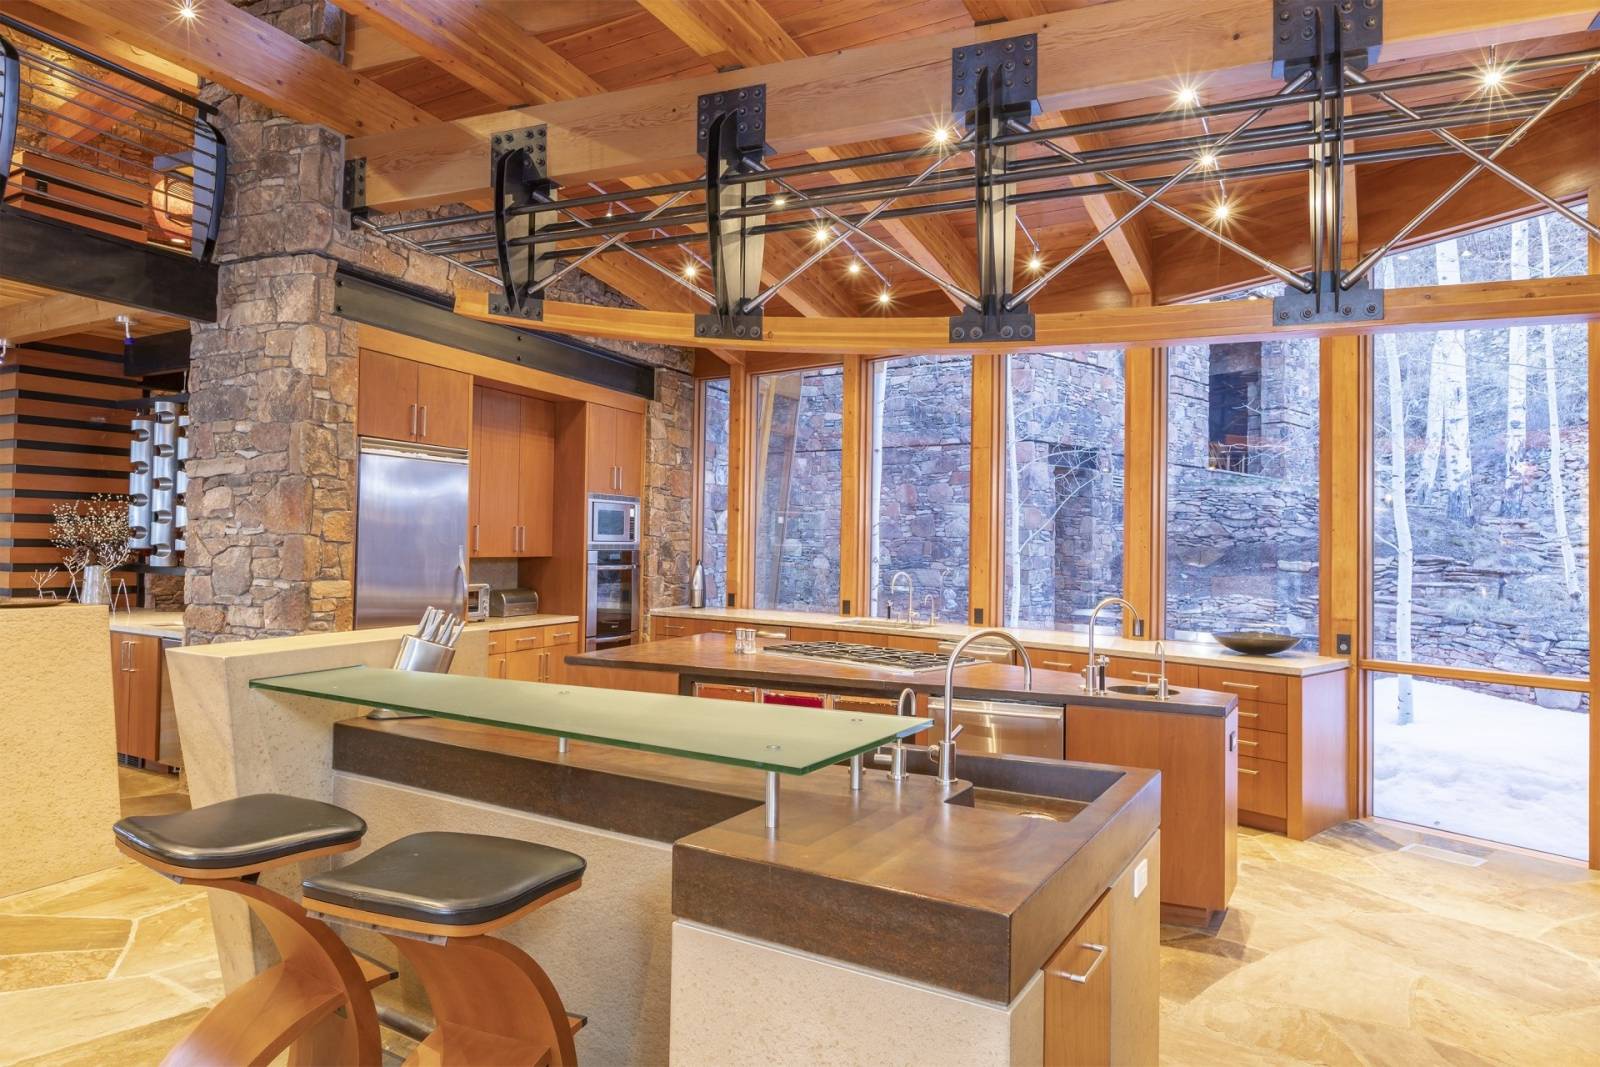 Telluride Vacation Rentals, PaGomo* - The stone components of the property were harvested from the 70-acre lot and provide an indigenous atmosphere, with cutting edge design and use of materials.